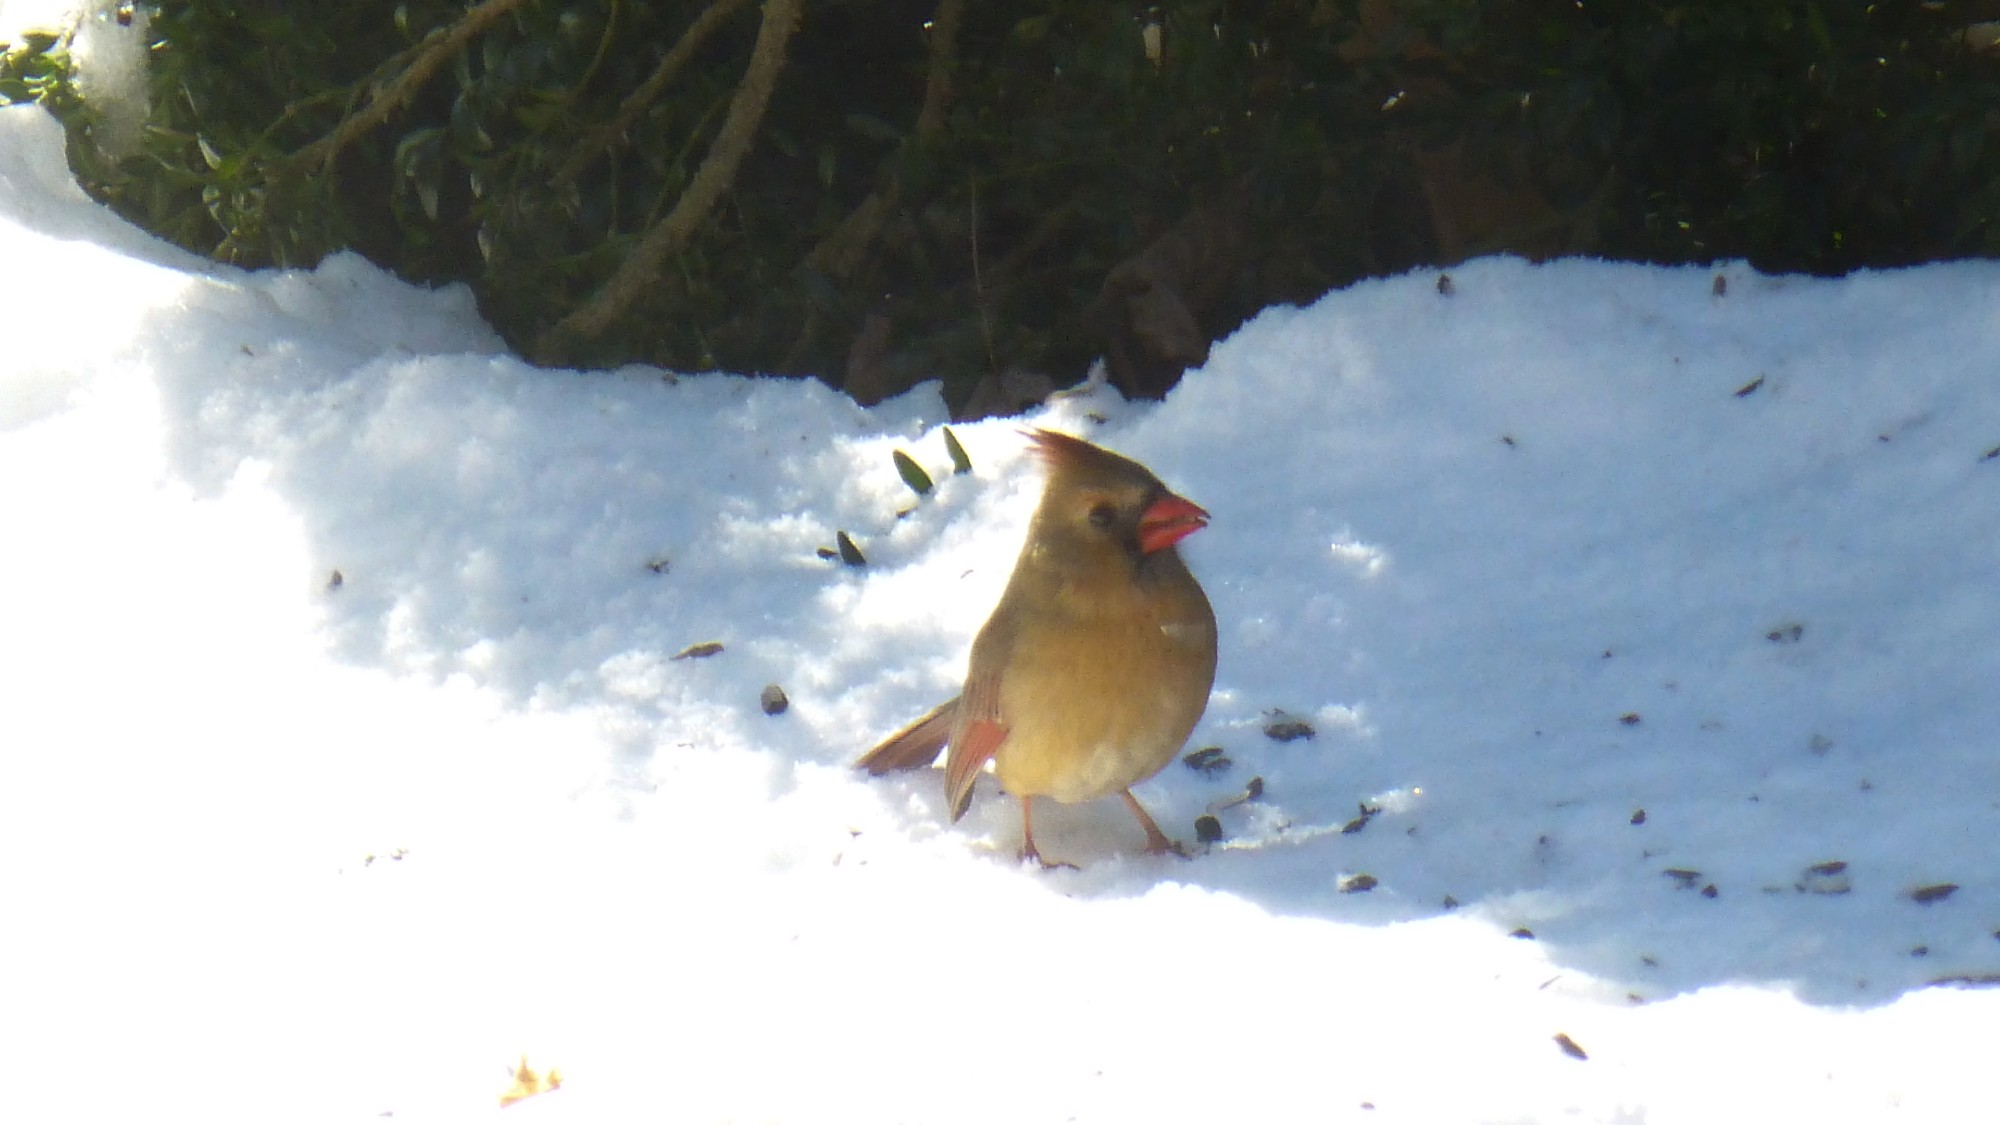 Light brown small bird standing in snow in front of an evergreen bush